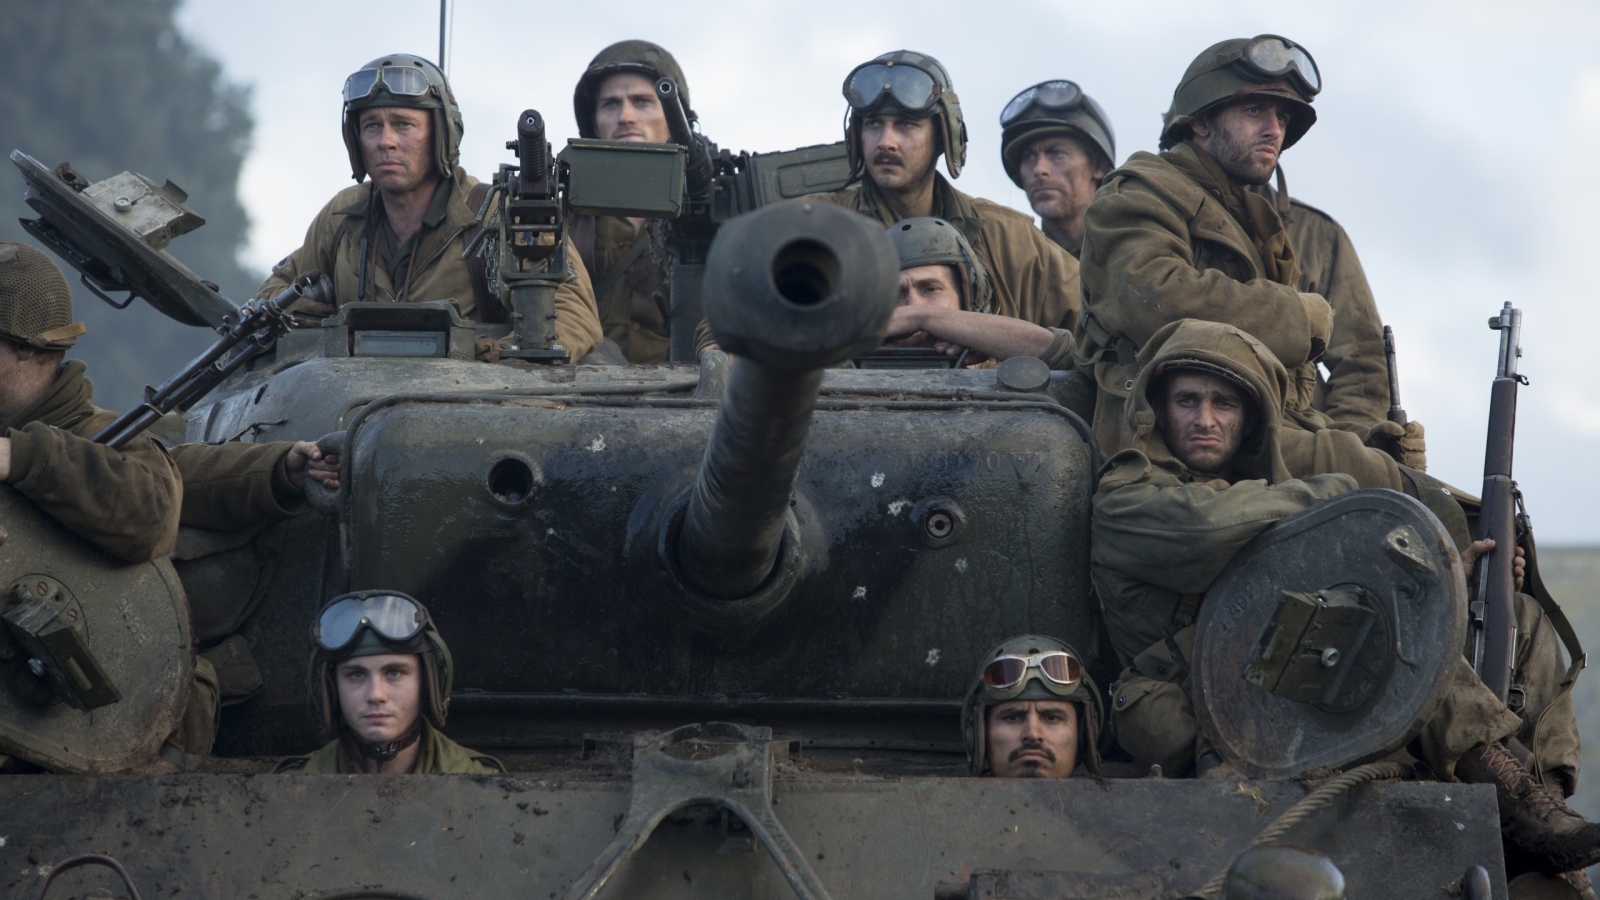 Fury Movie 2014 for 1600 x 900 HDTV resolution